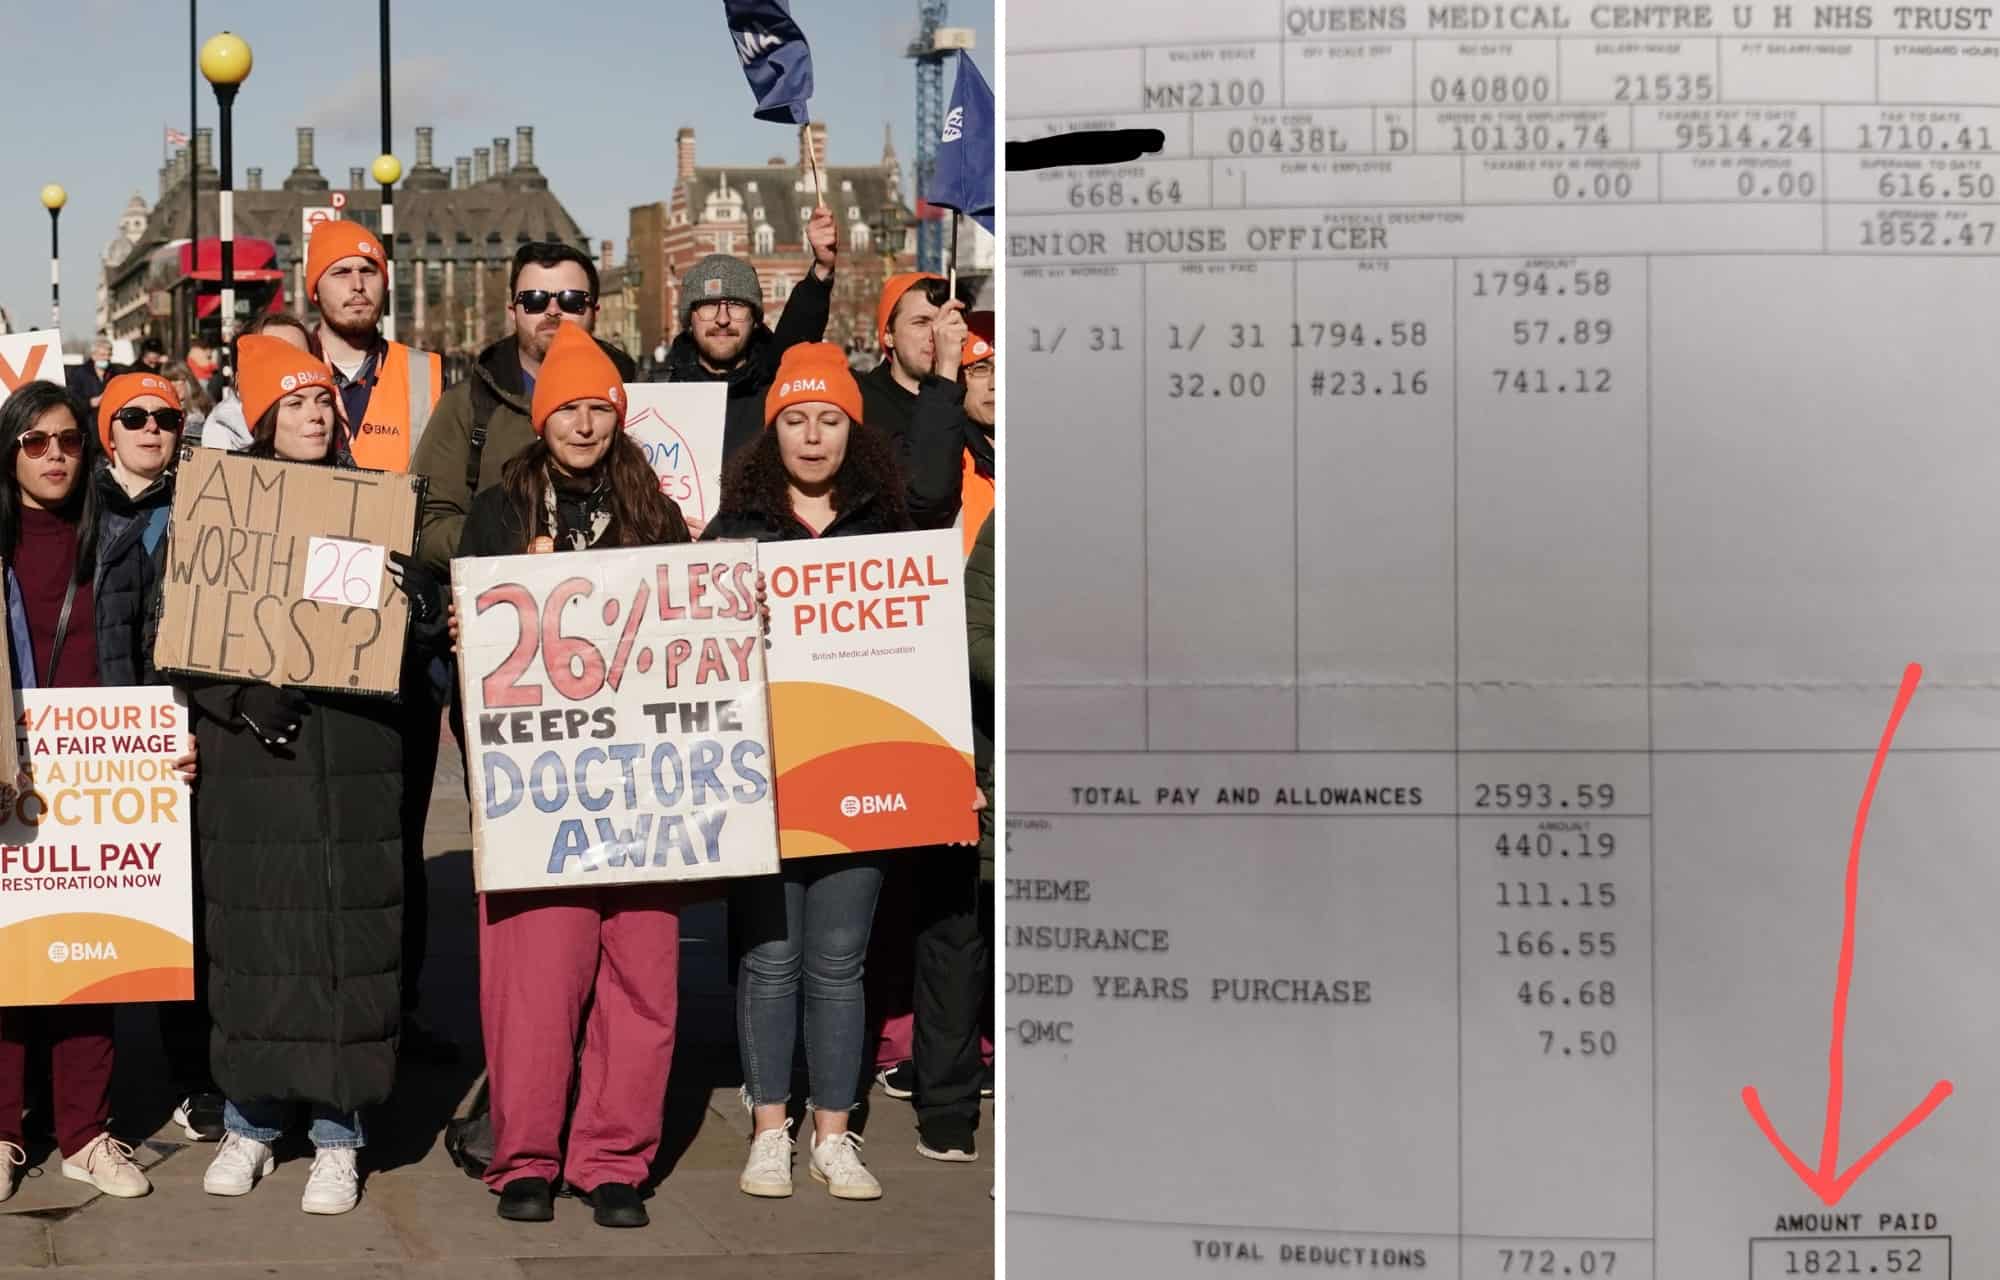 Two payslips taken 22 years apart show why junior doctors are striking